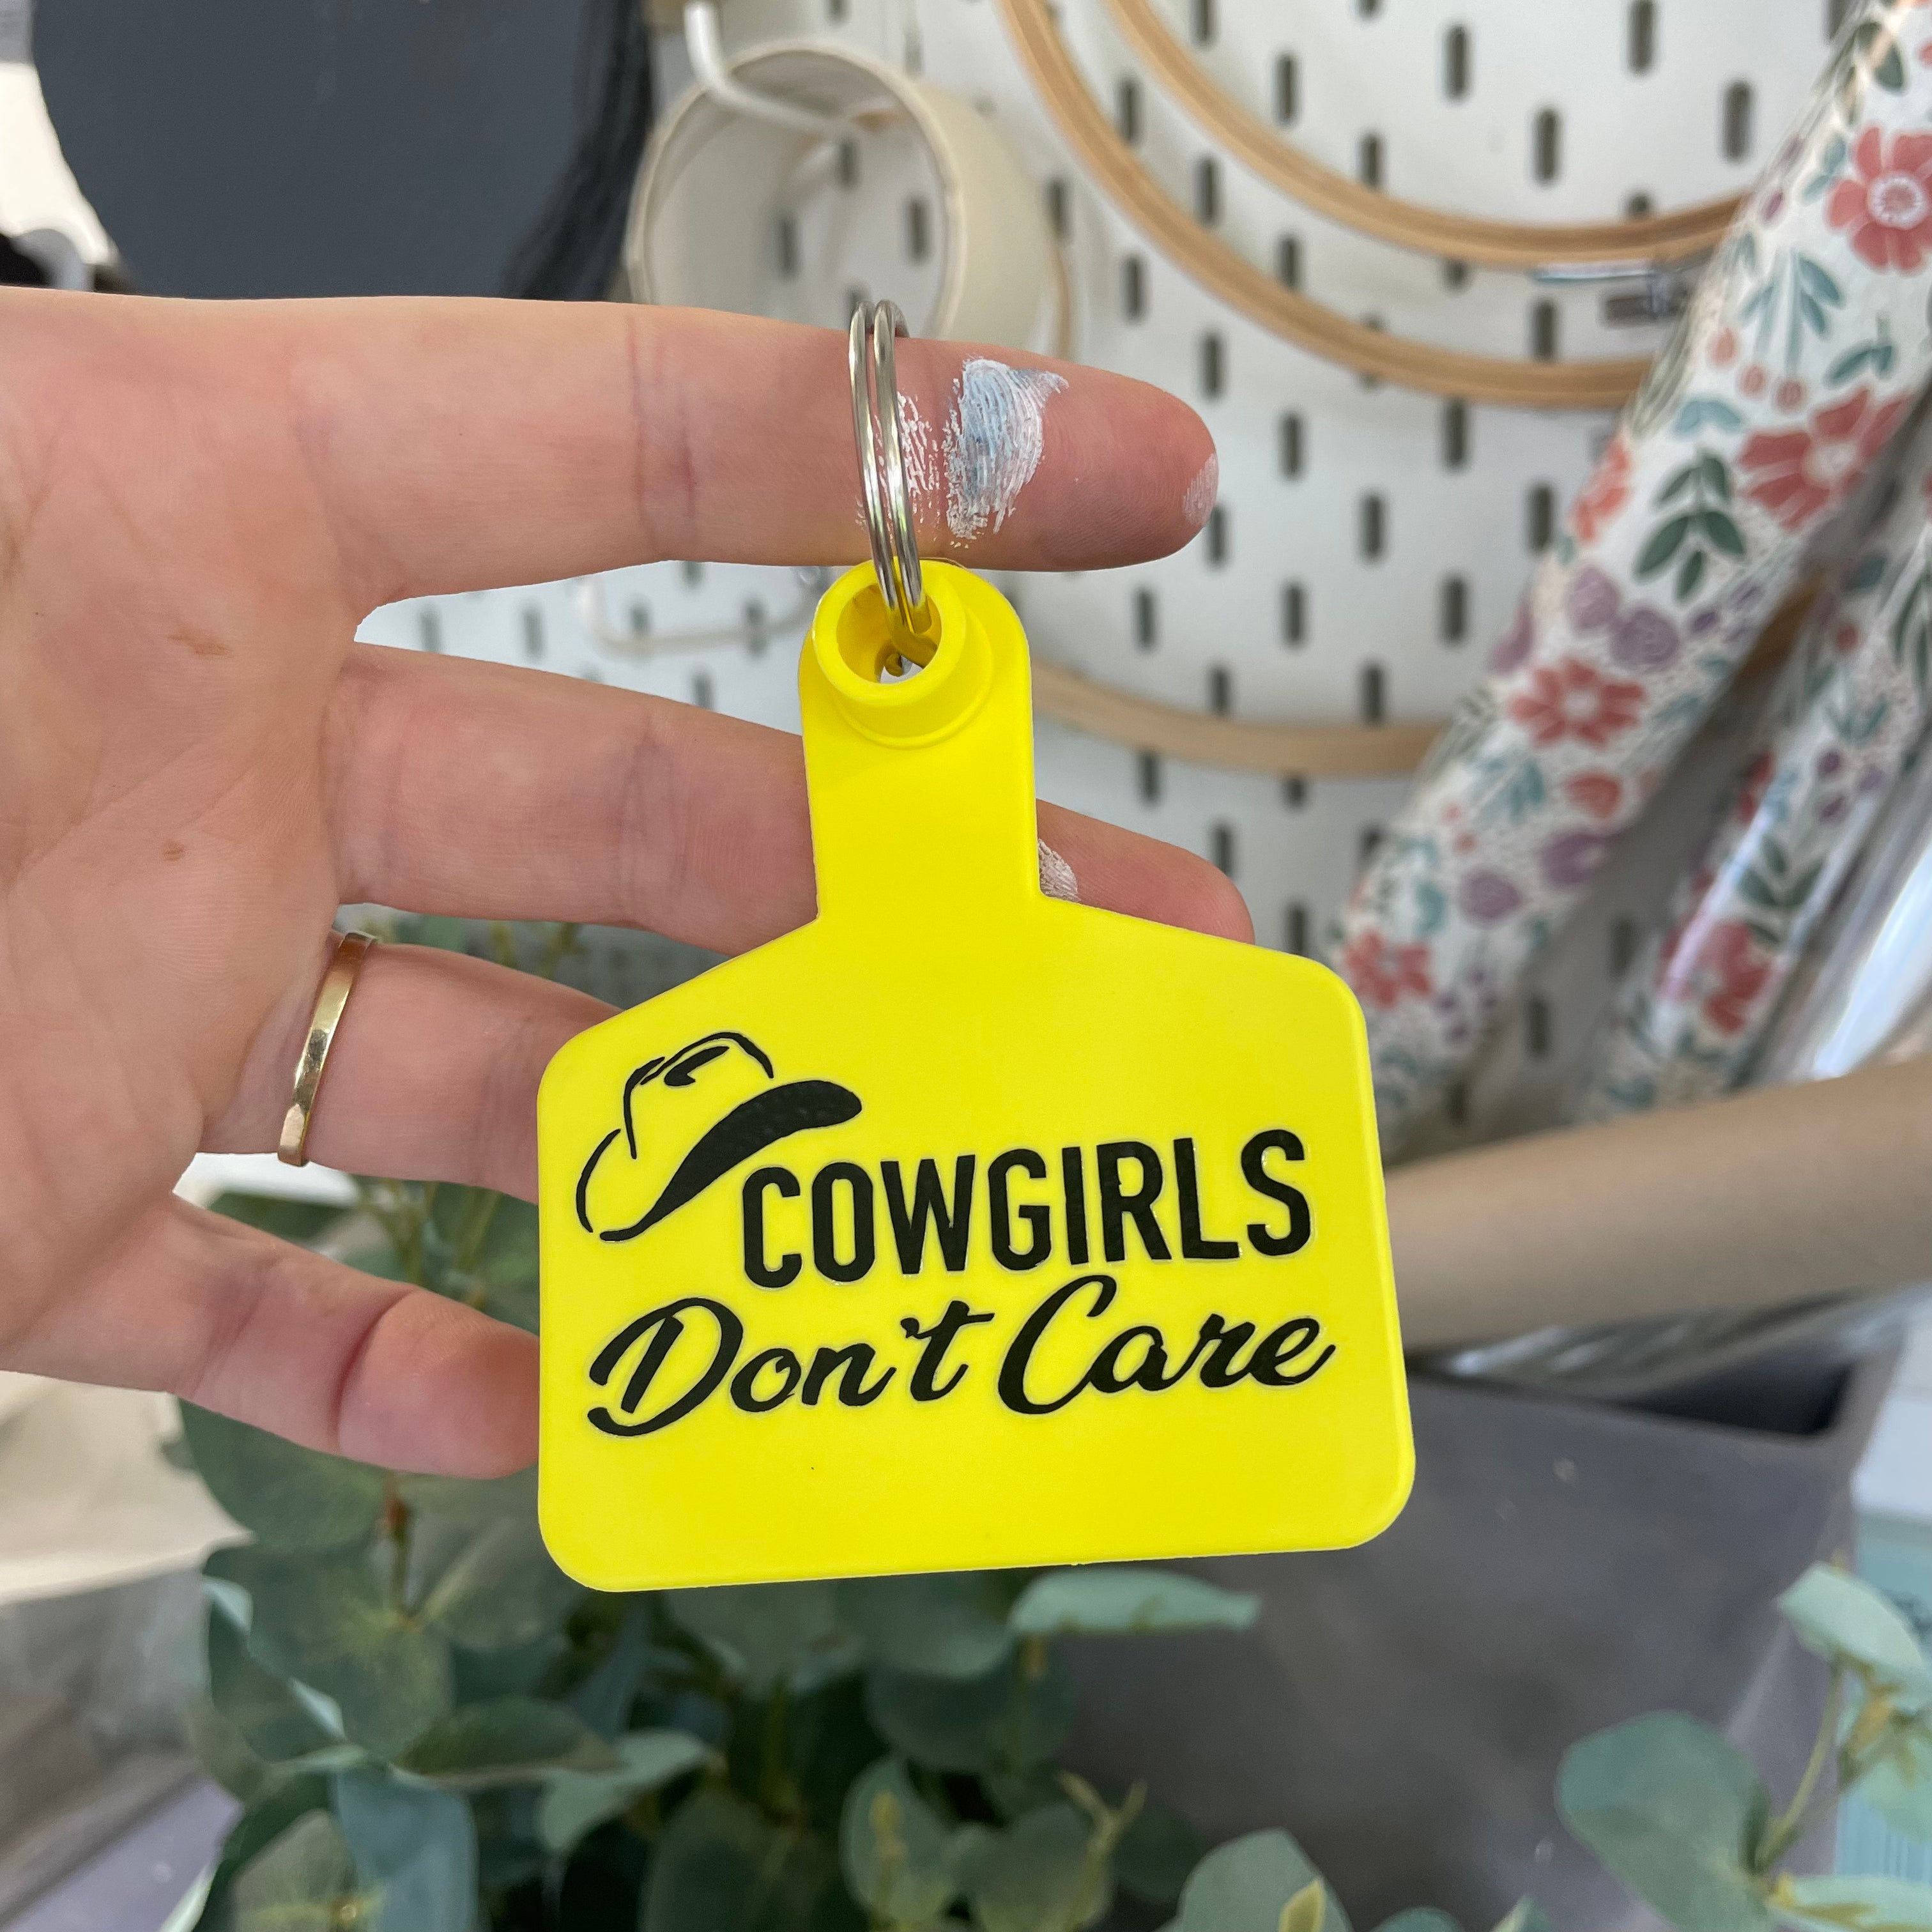 ‘COWGIRLS DON’T CARE’ Cattle Tag Keyring